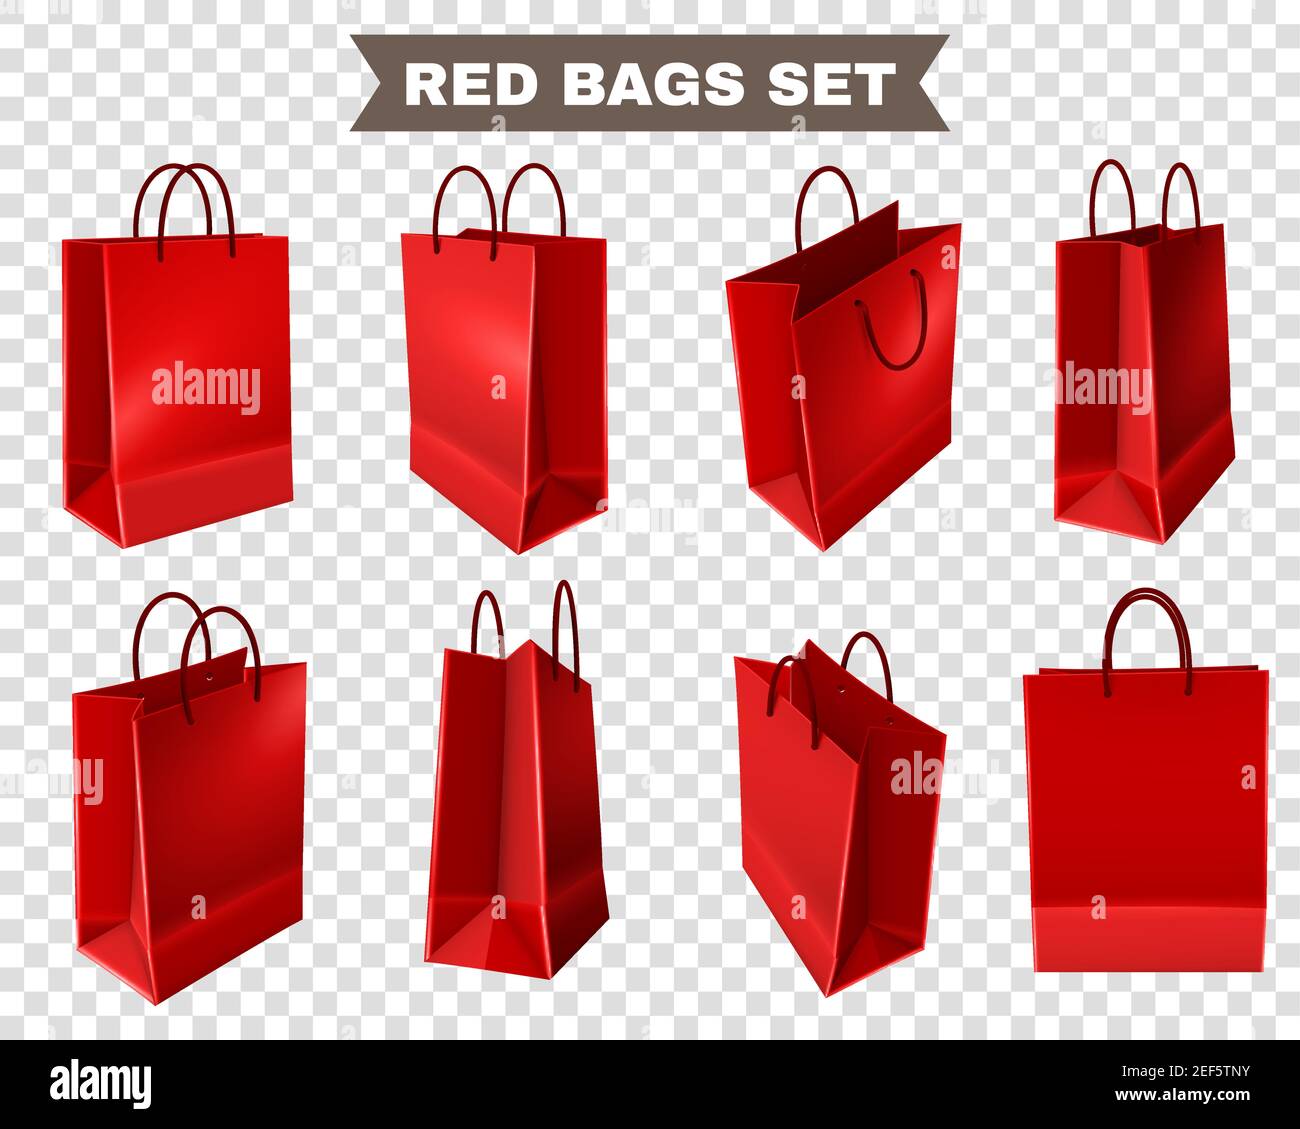 Premium Vector  Set of red shopping bags from plastic or paper with  handles on transparent background. illustration.